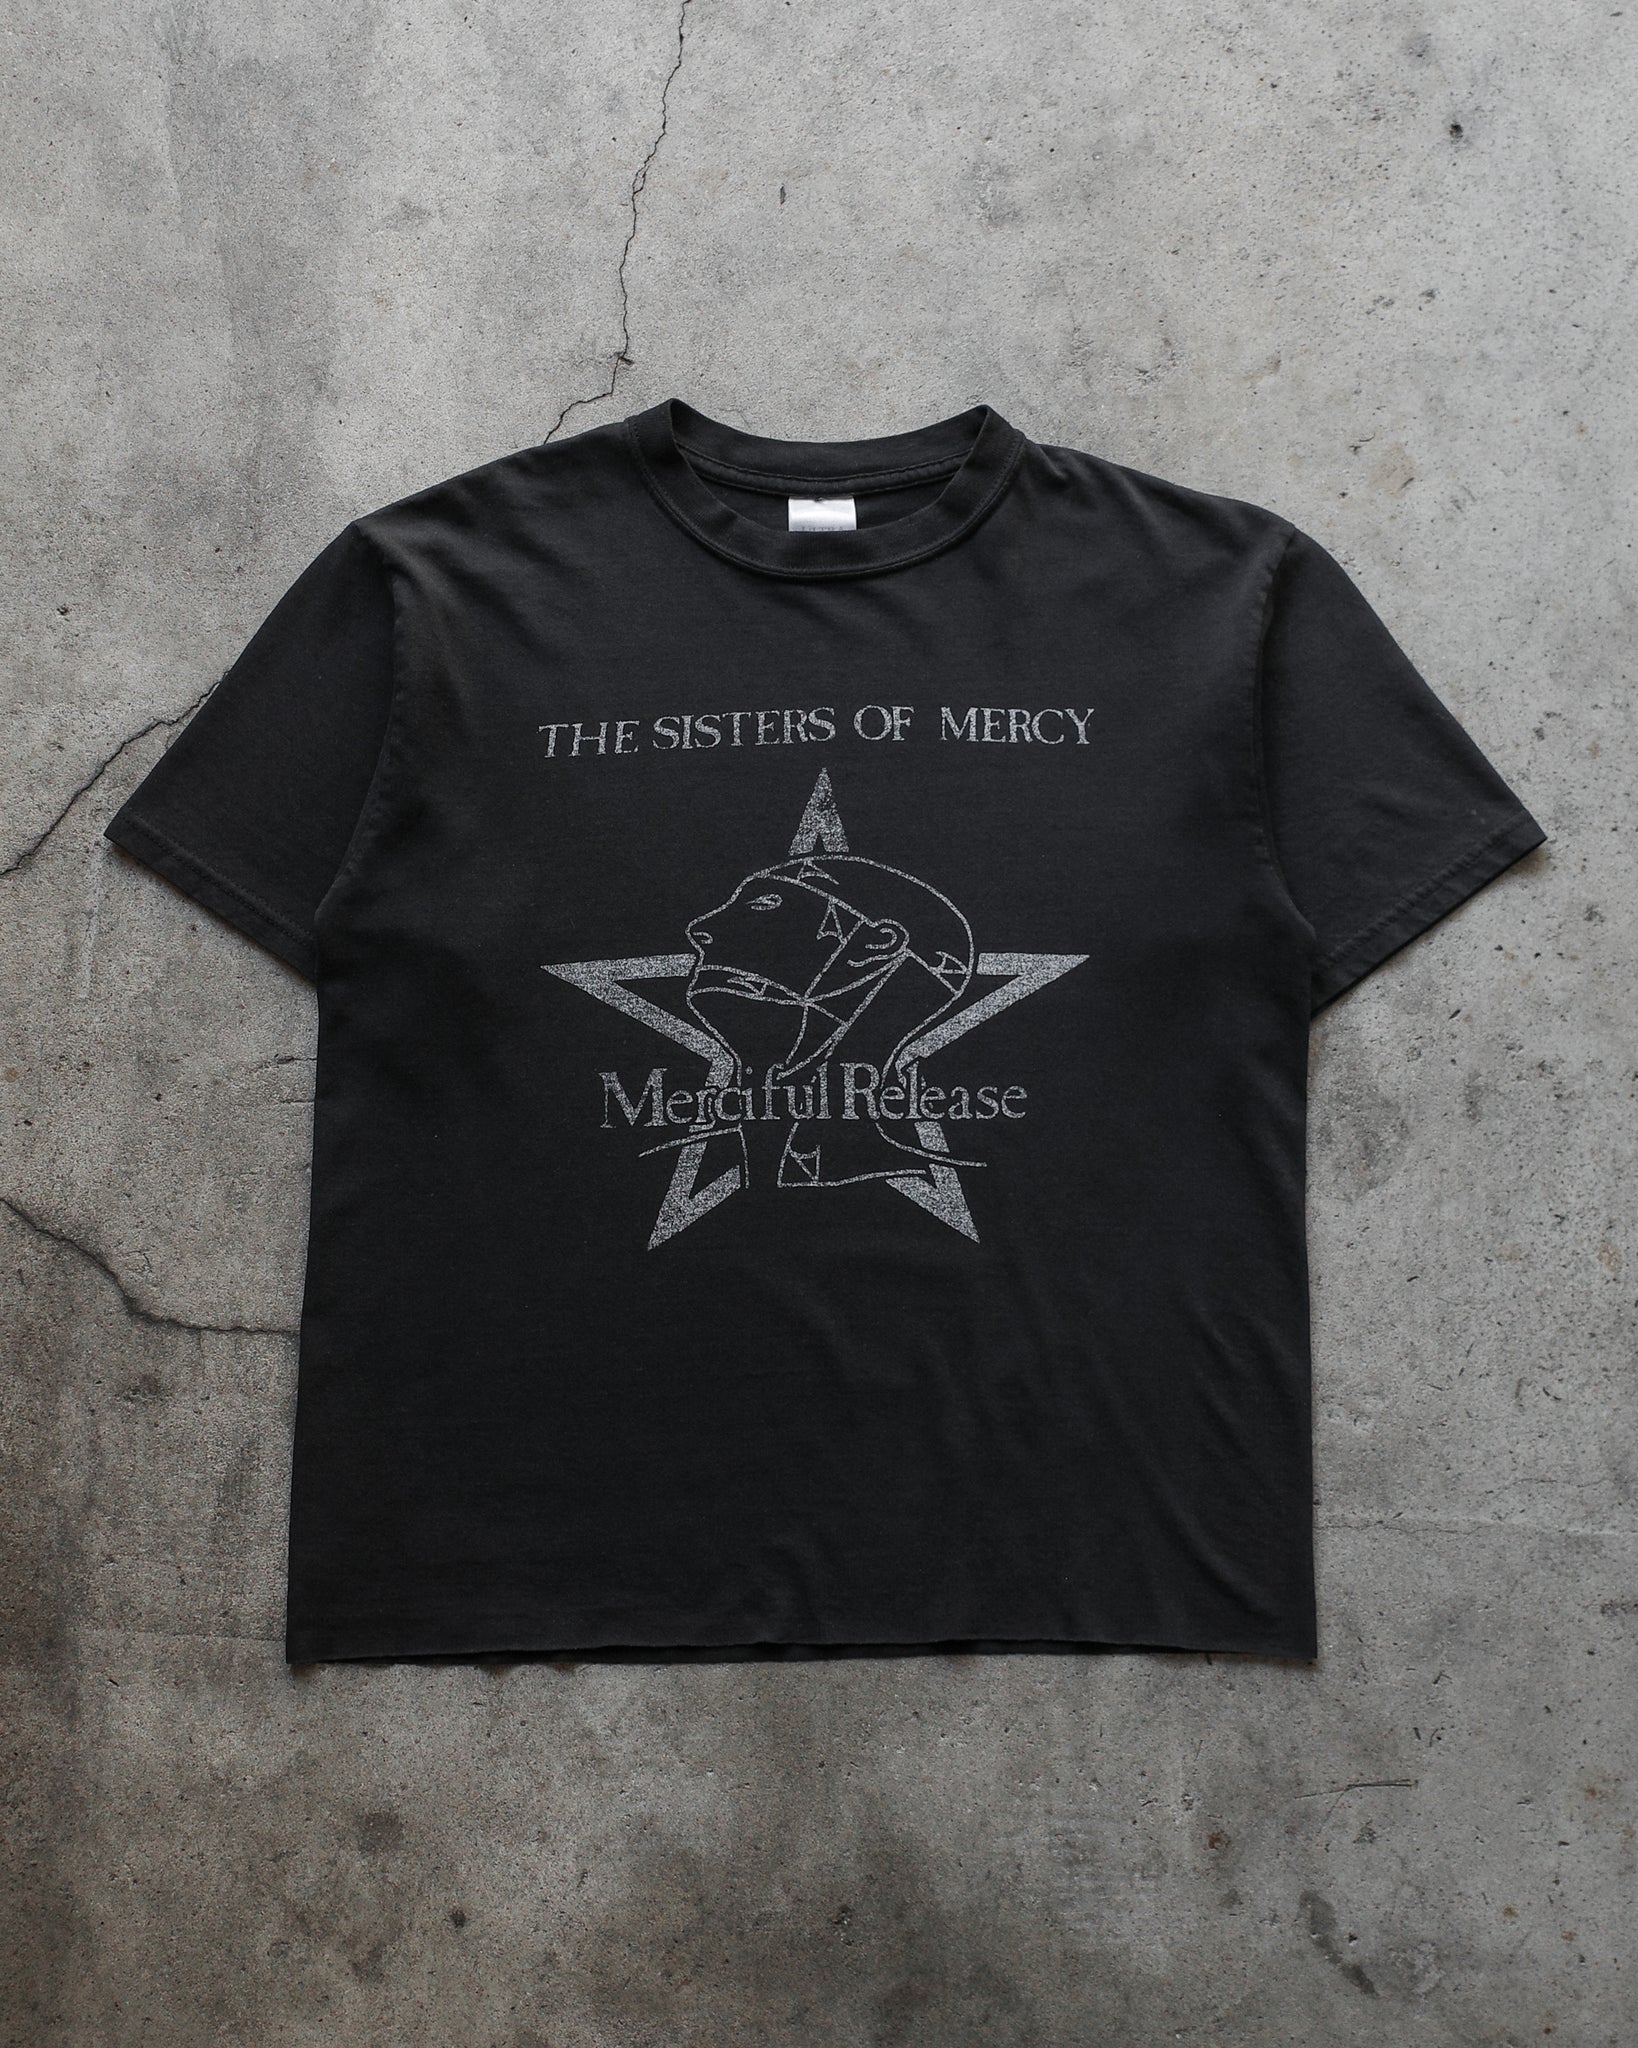 Early 2000s Sisters of Mercy "Merciful release" Tee